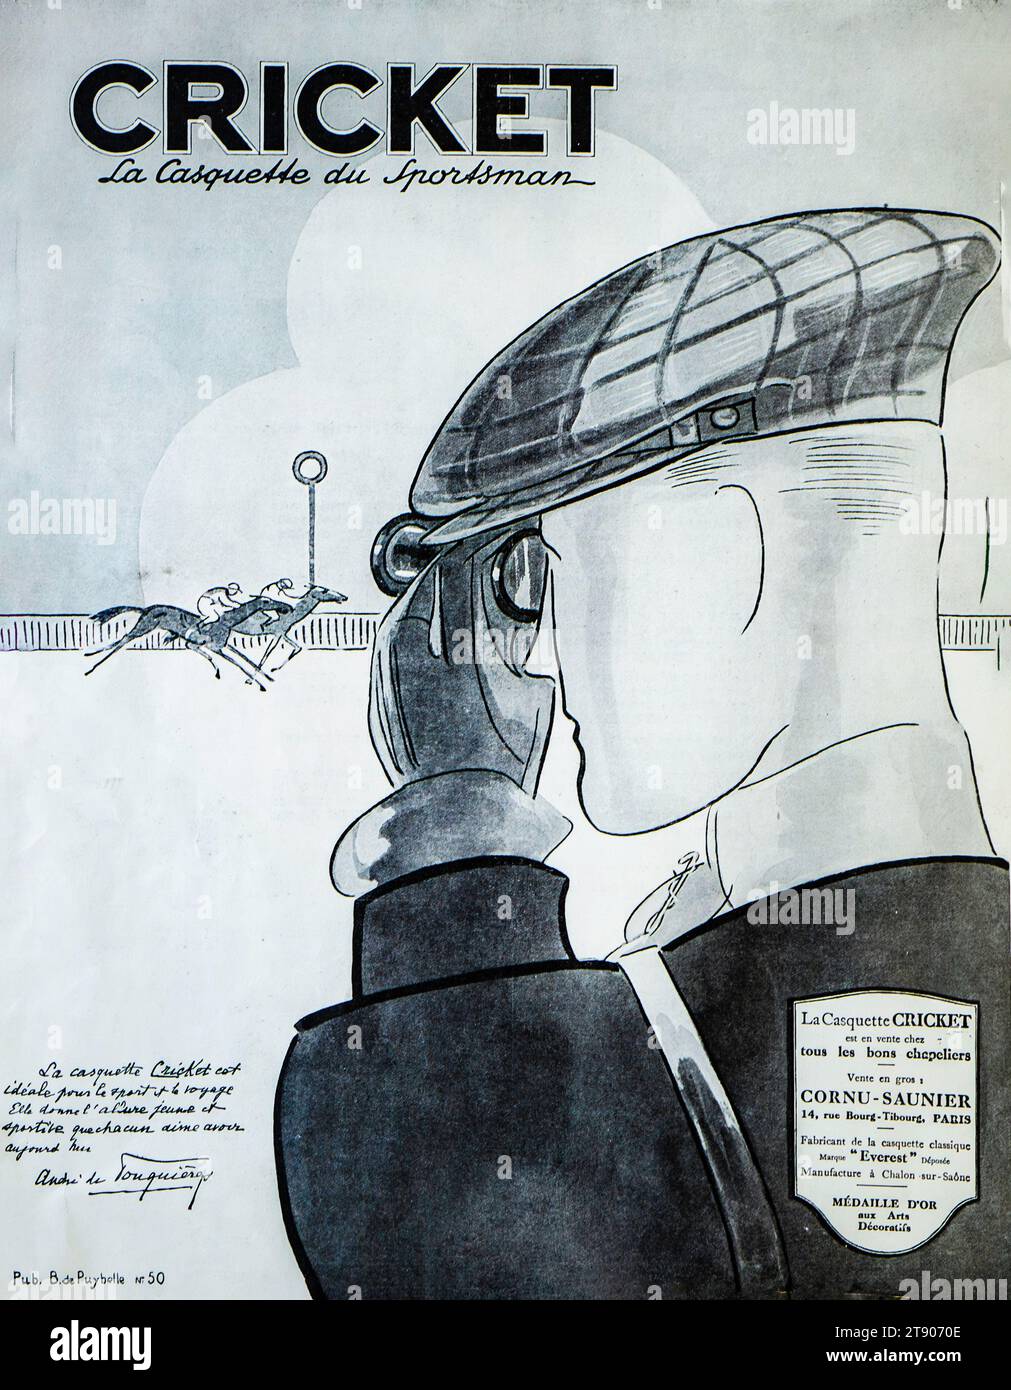 1920s French ad for Cricket sports caps, depicting a profile view of a sportsman wearing the cap Stock Photo